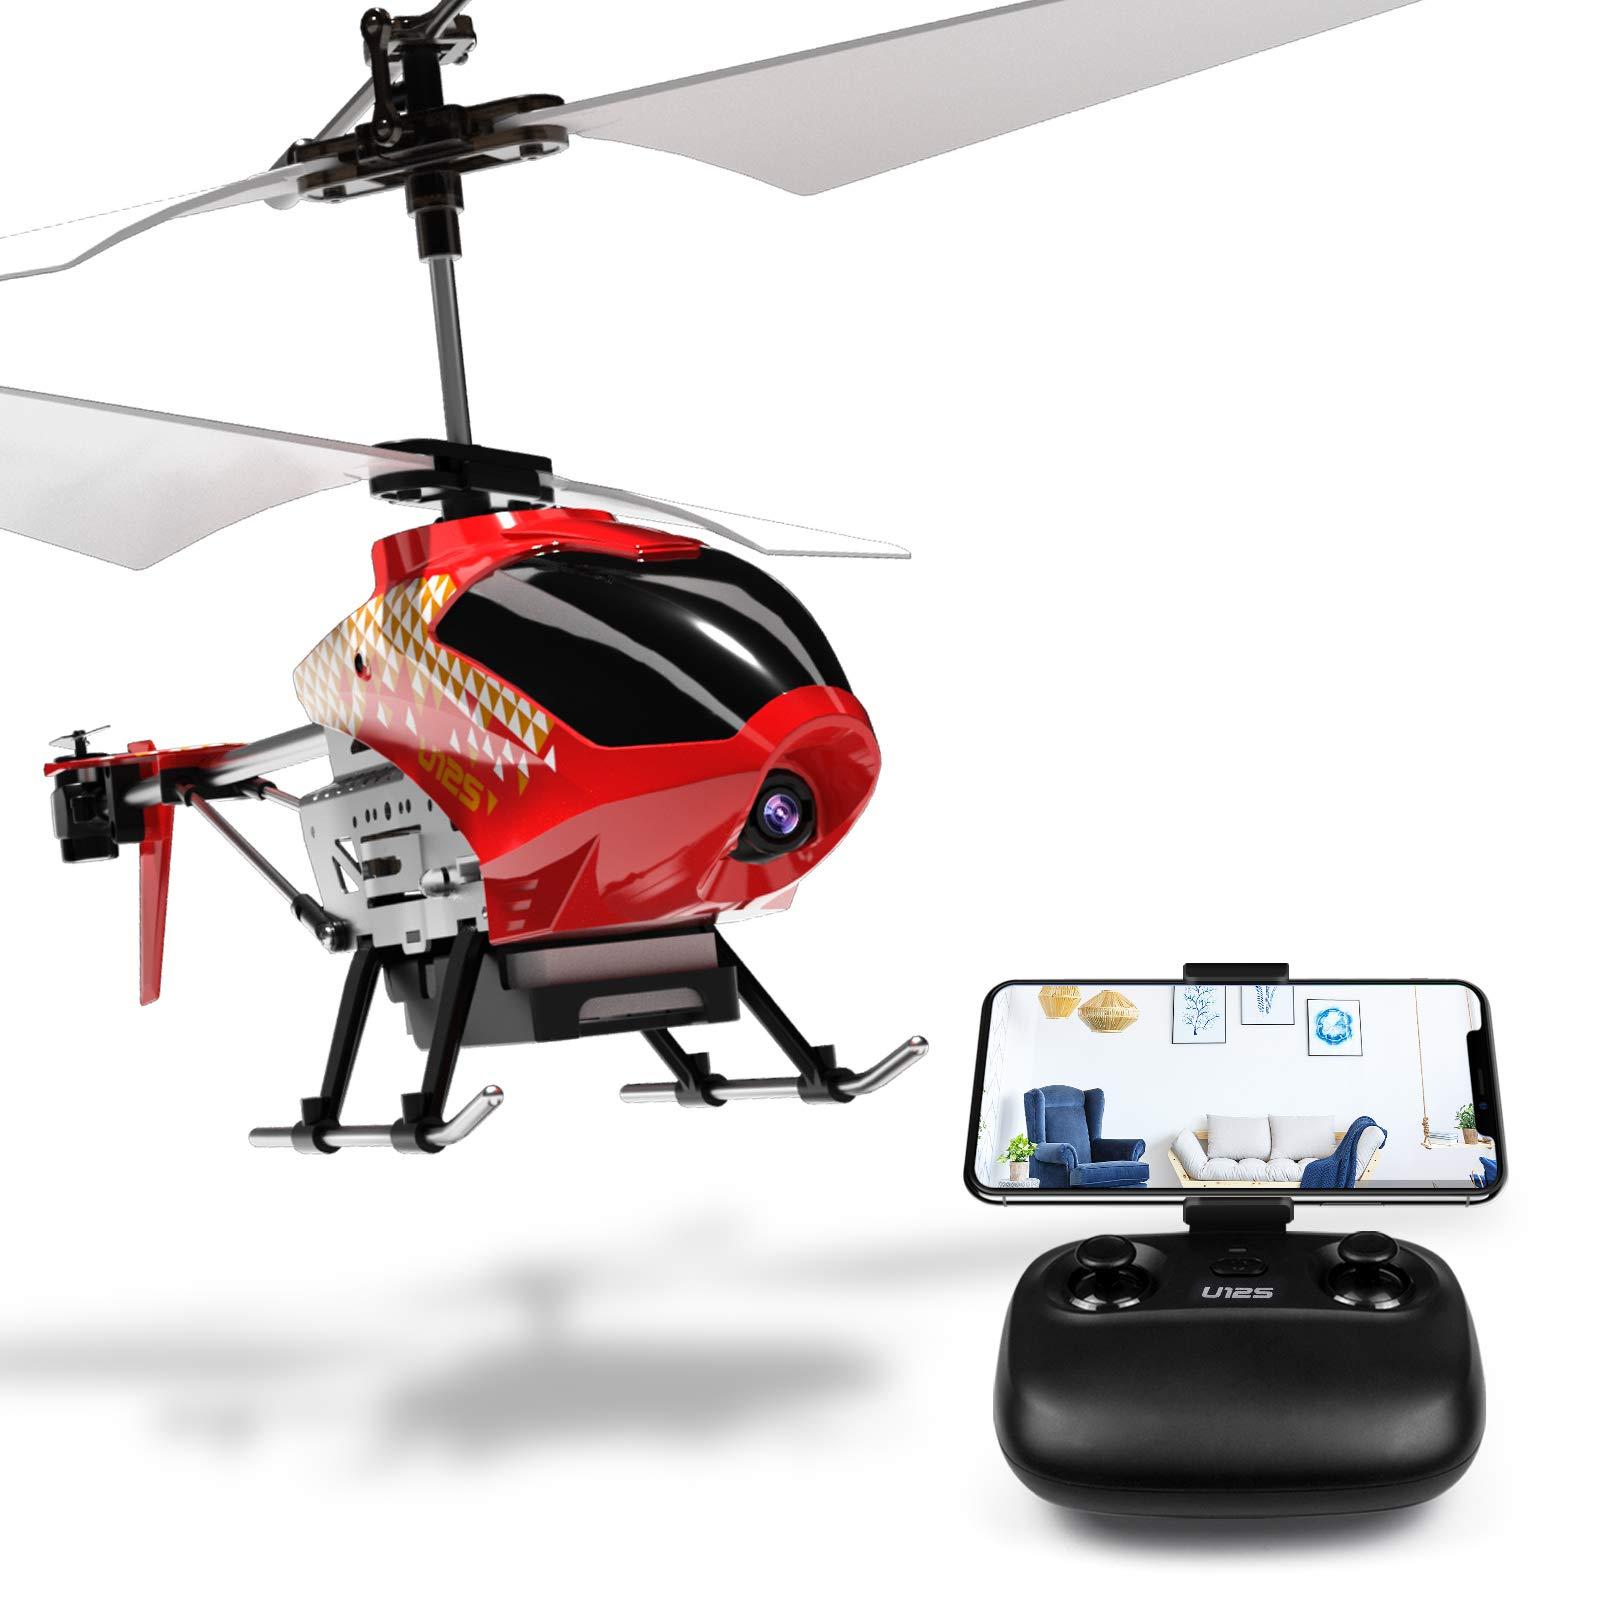 Rc Remote Control Helicopter With Camera: Price points for RC remote control helicopters with camera.